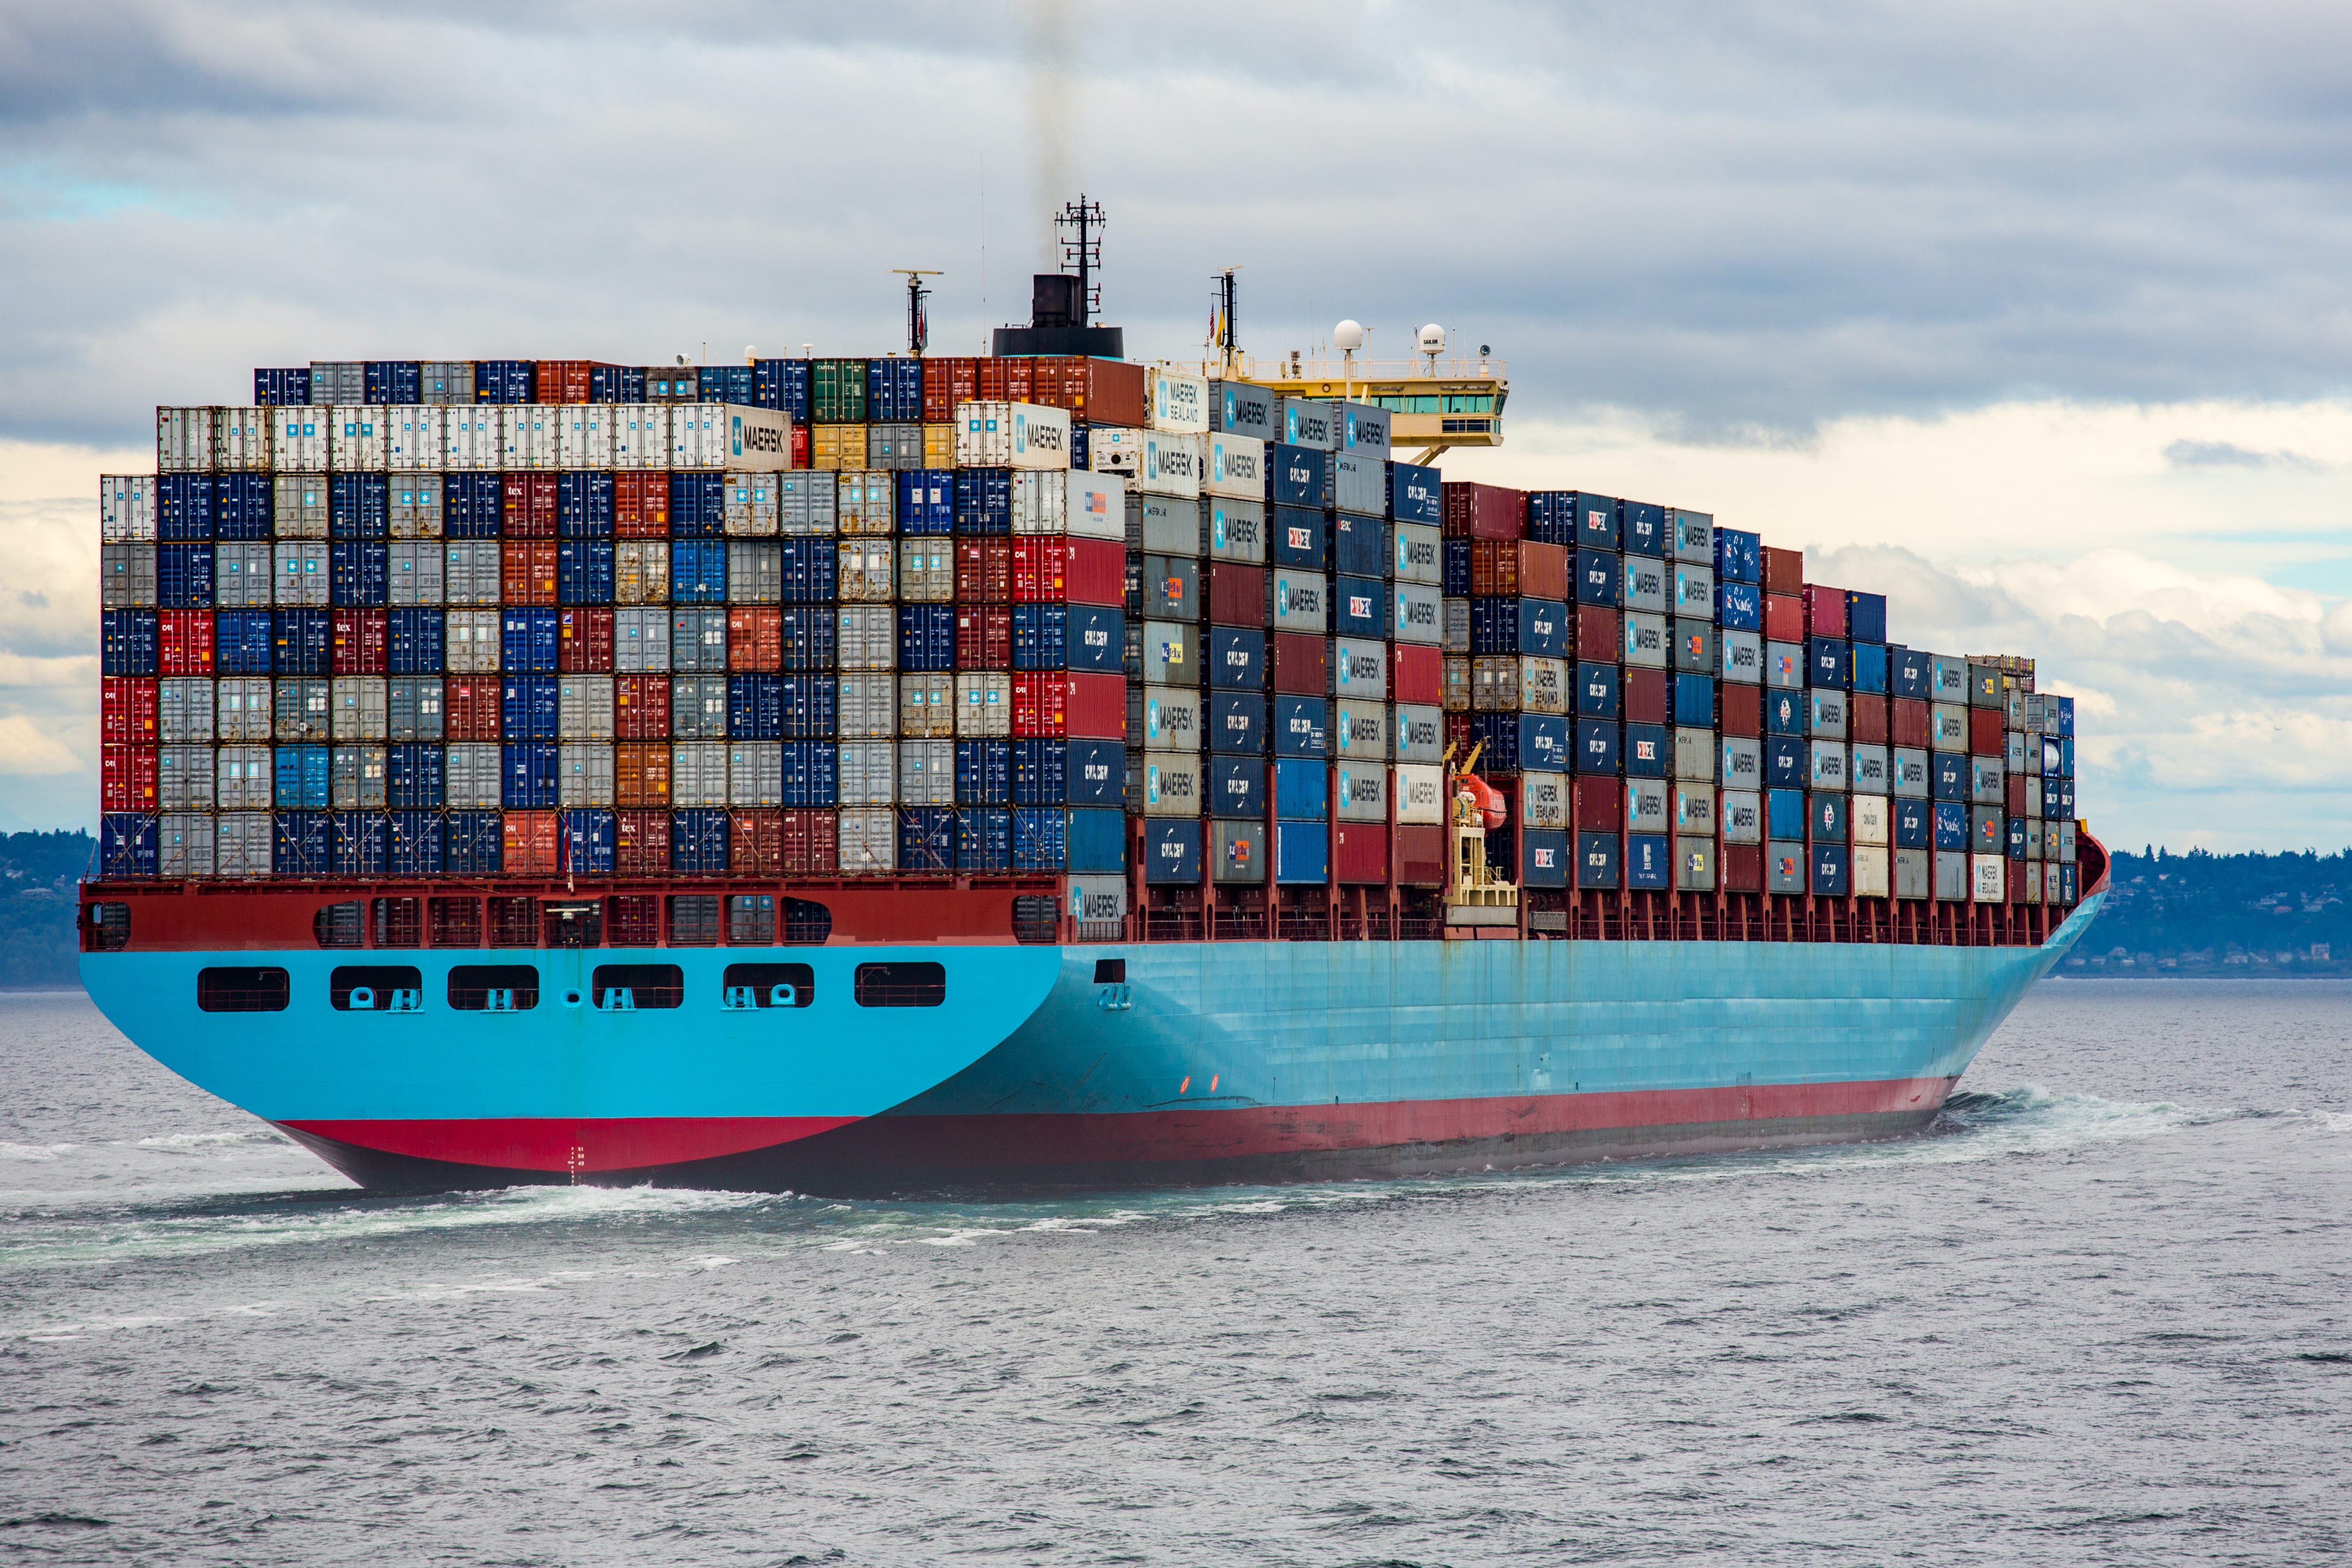 Shipping container costs look set to remain high during 2022